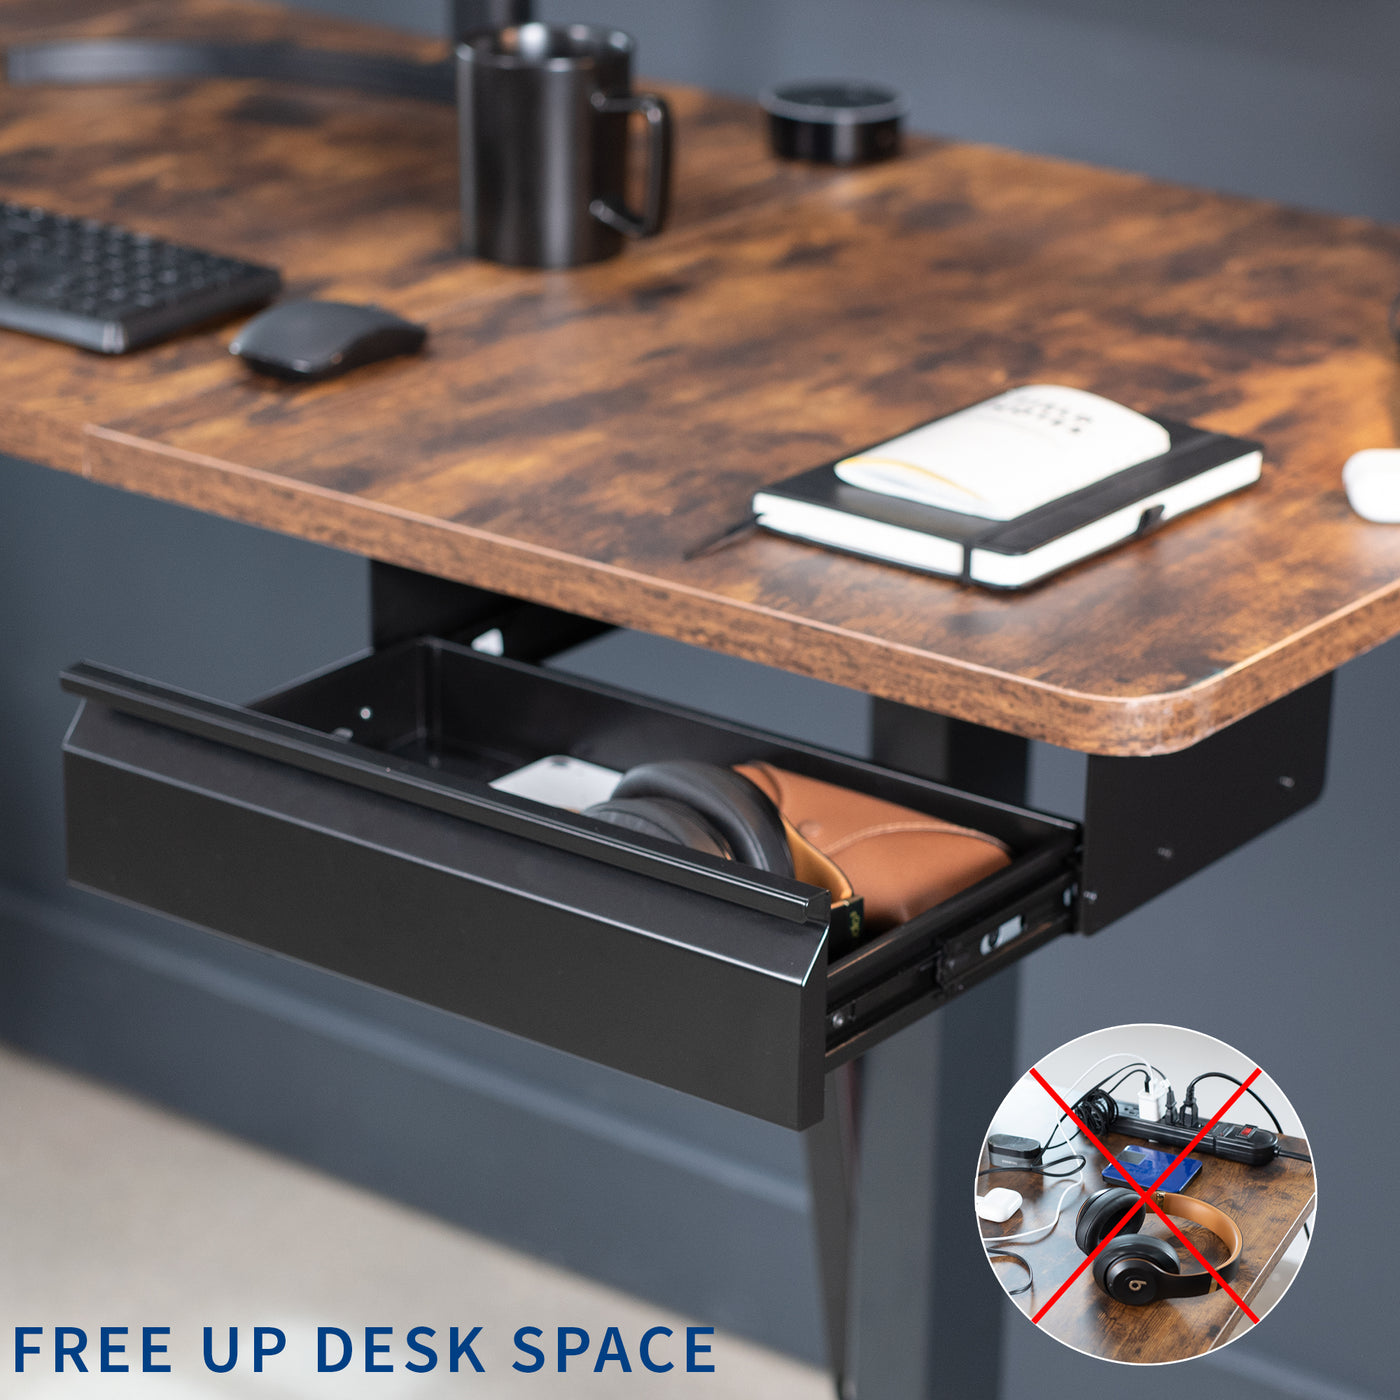 Durable versatile pullout under desk organizer drawer for extra storage with built-in power strip.